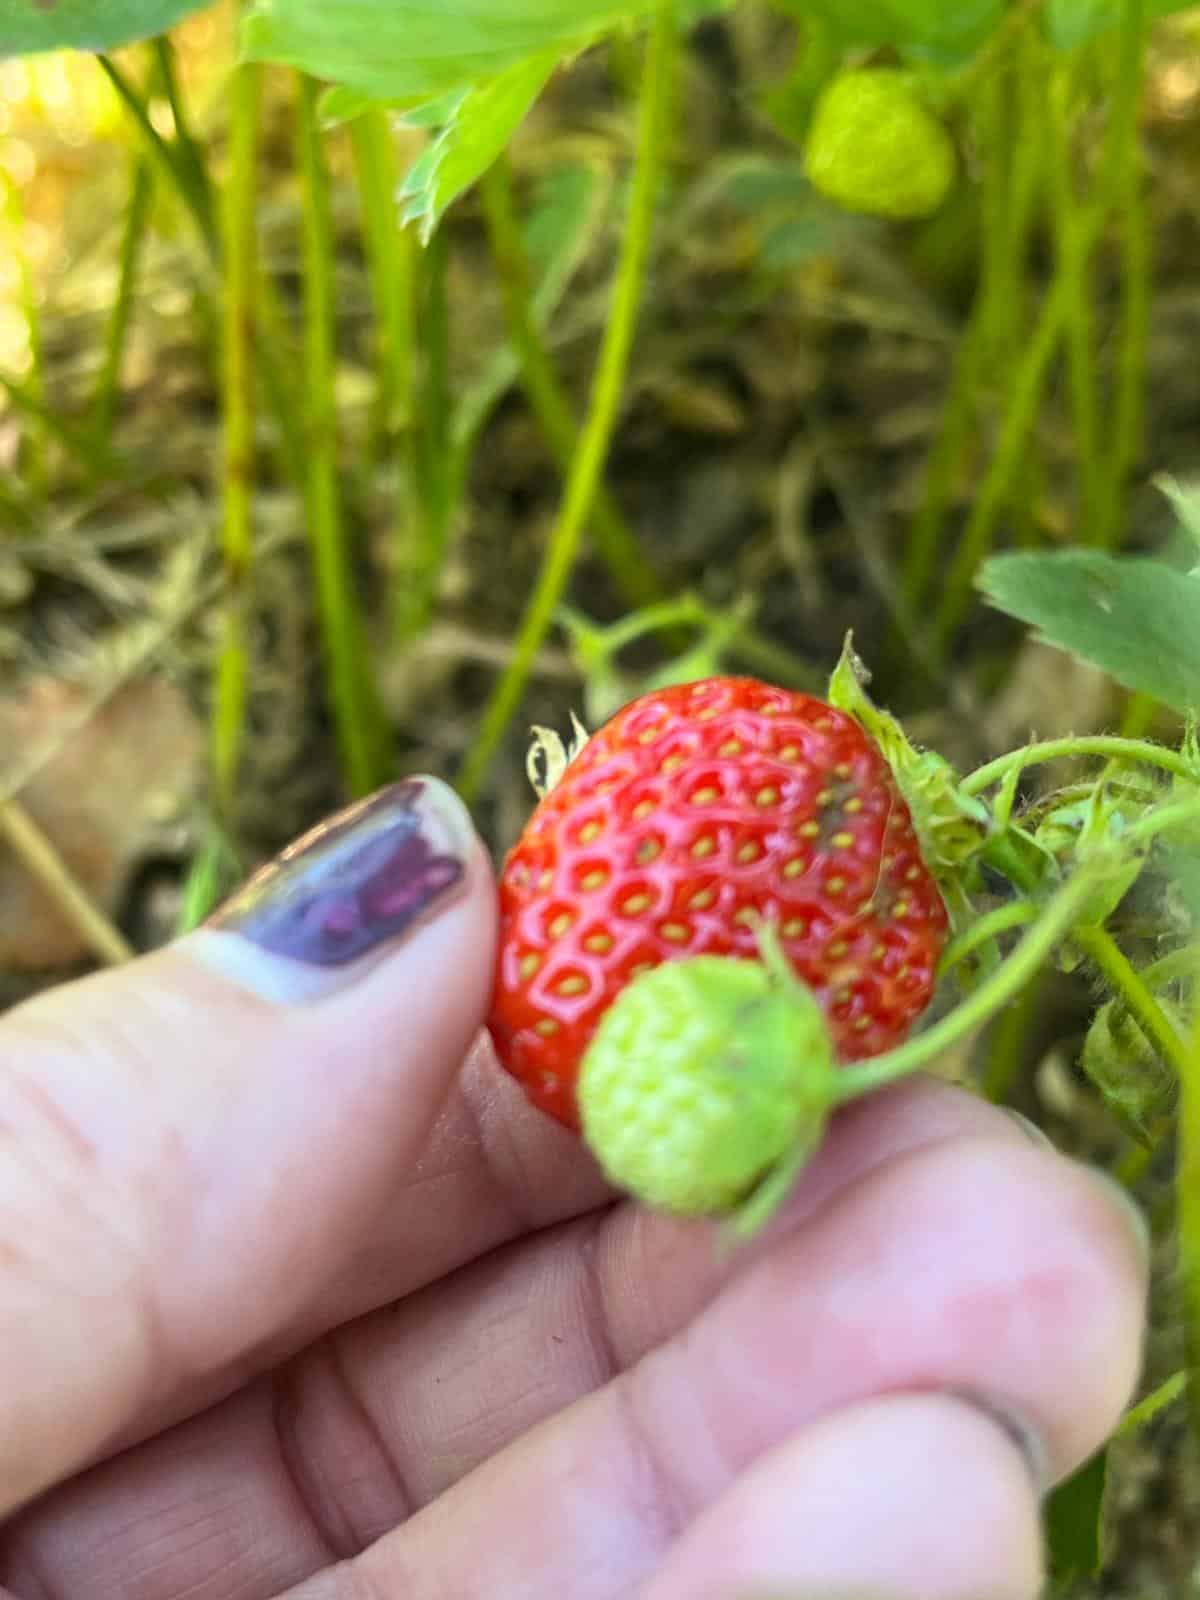 Brown spot on a a strawberry